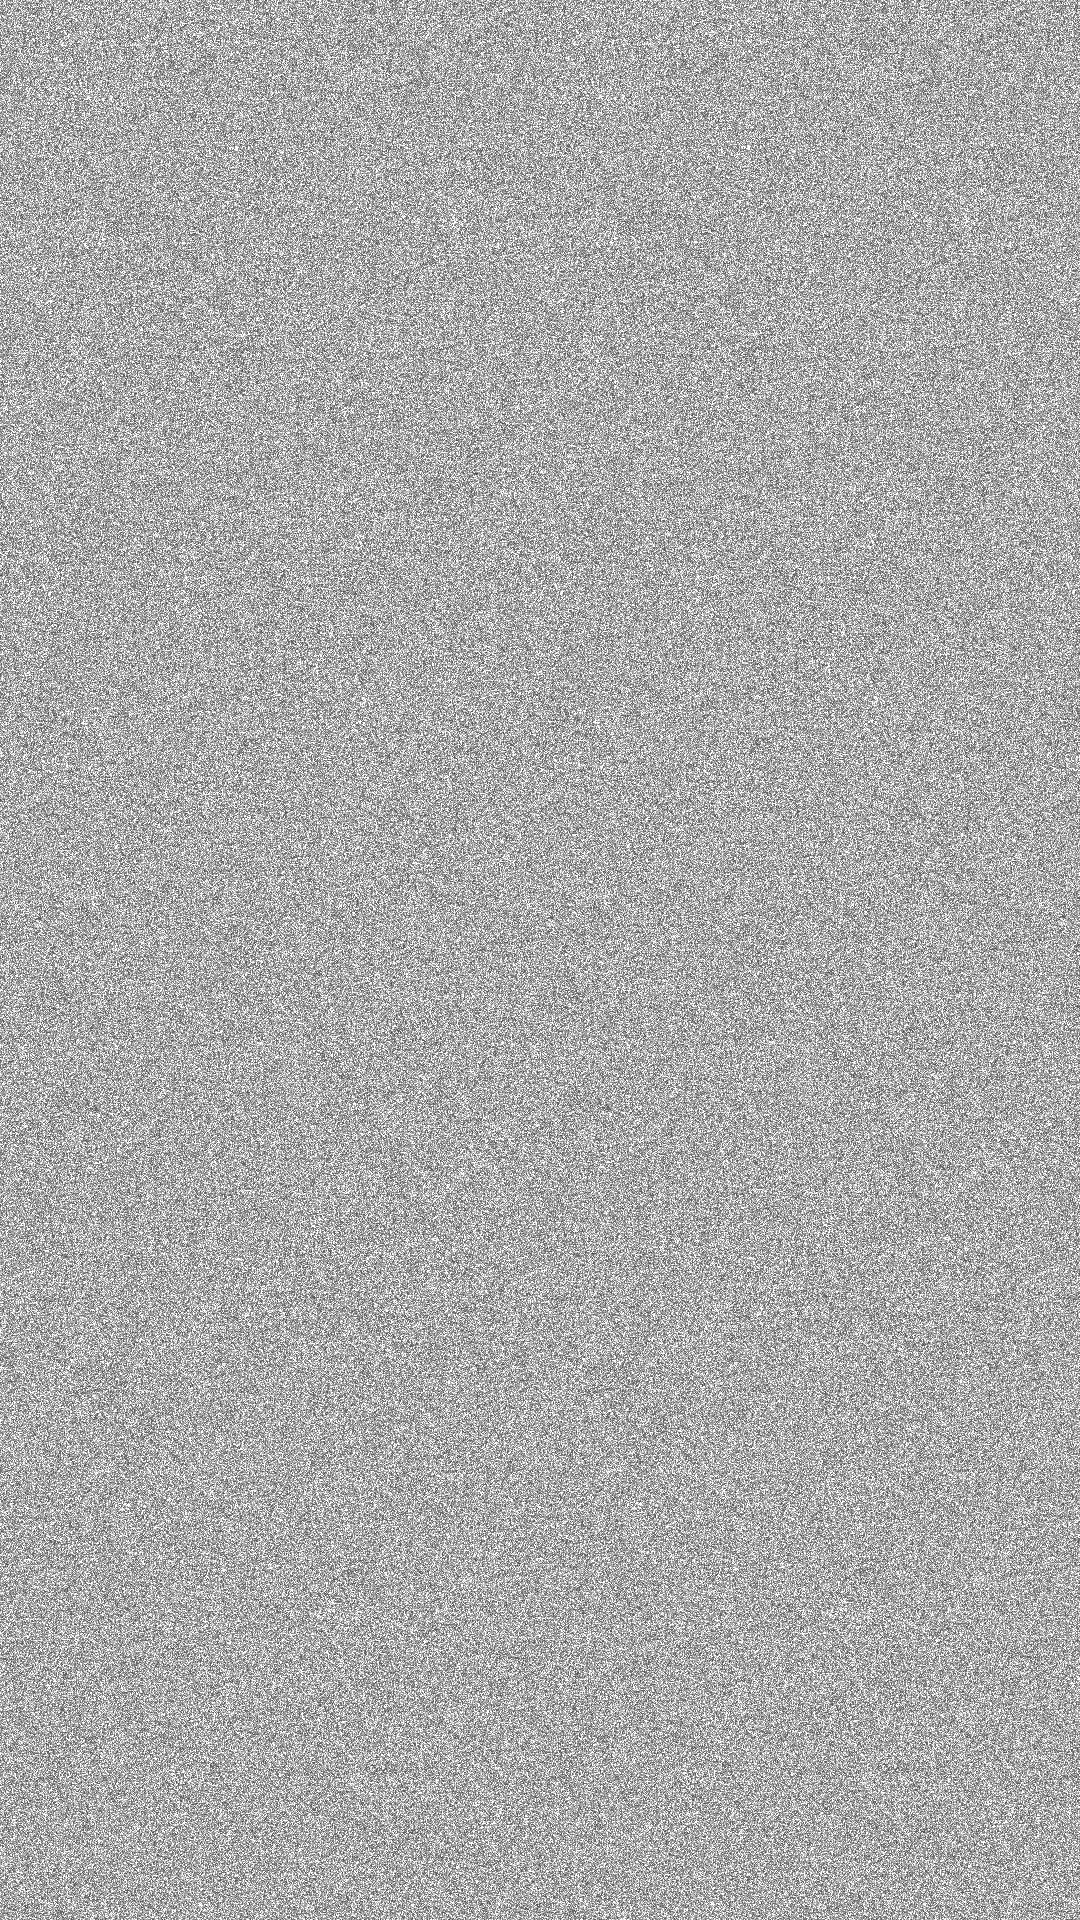 A simple grayscale picture of random noise